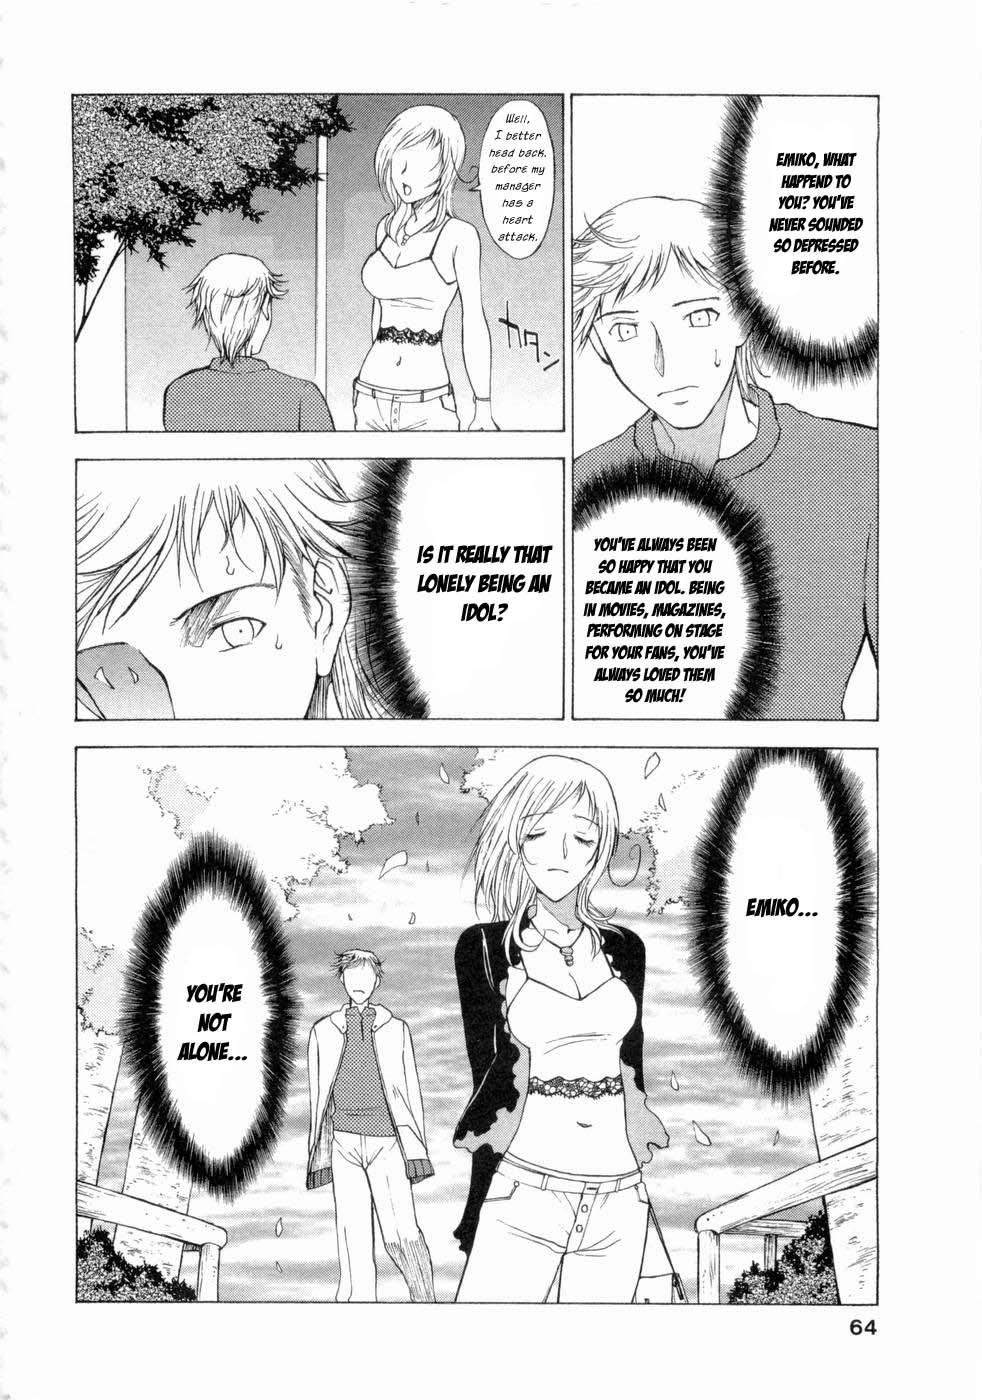 1080p My Sister, the Idol Amature - Page 8